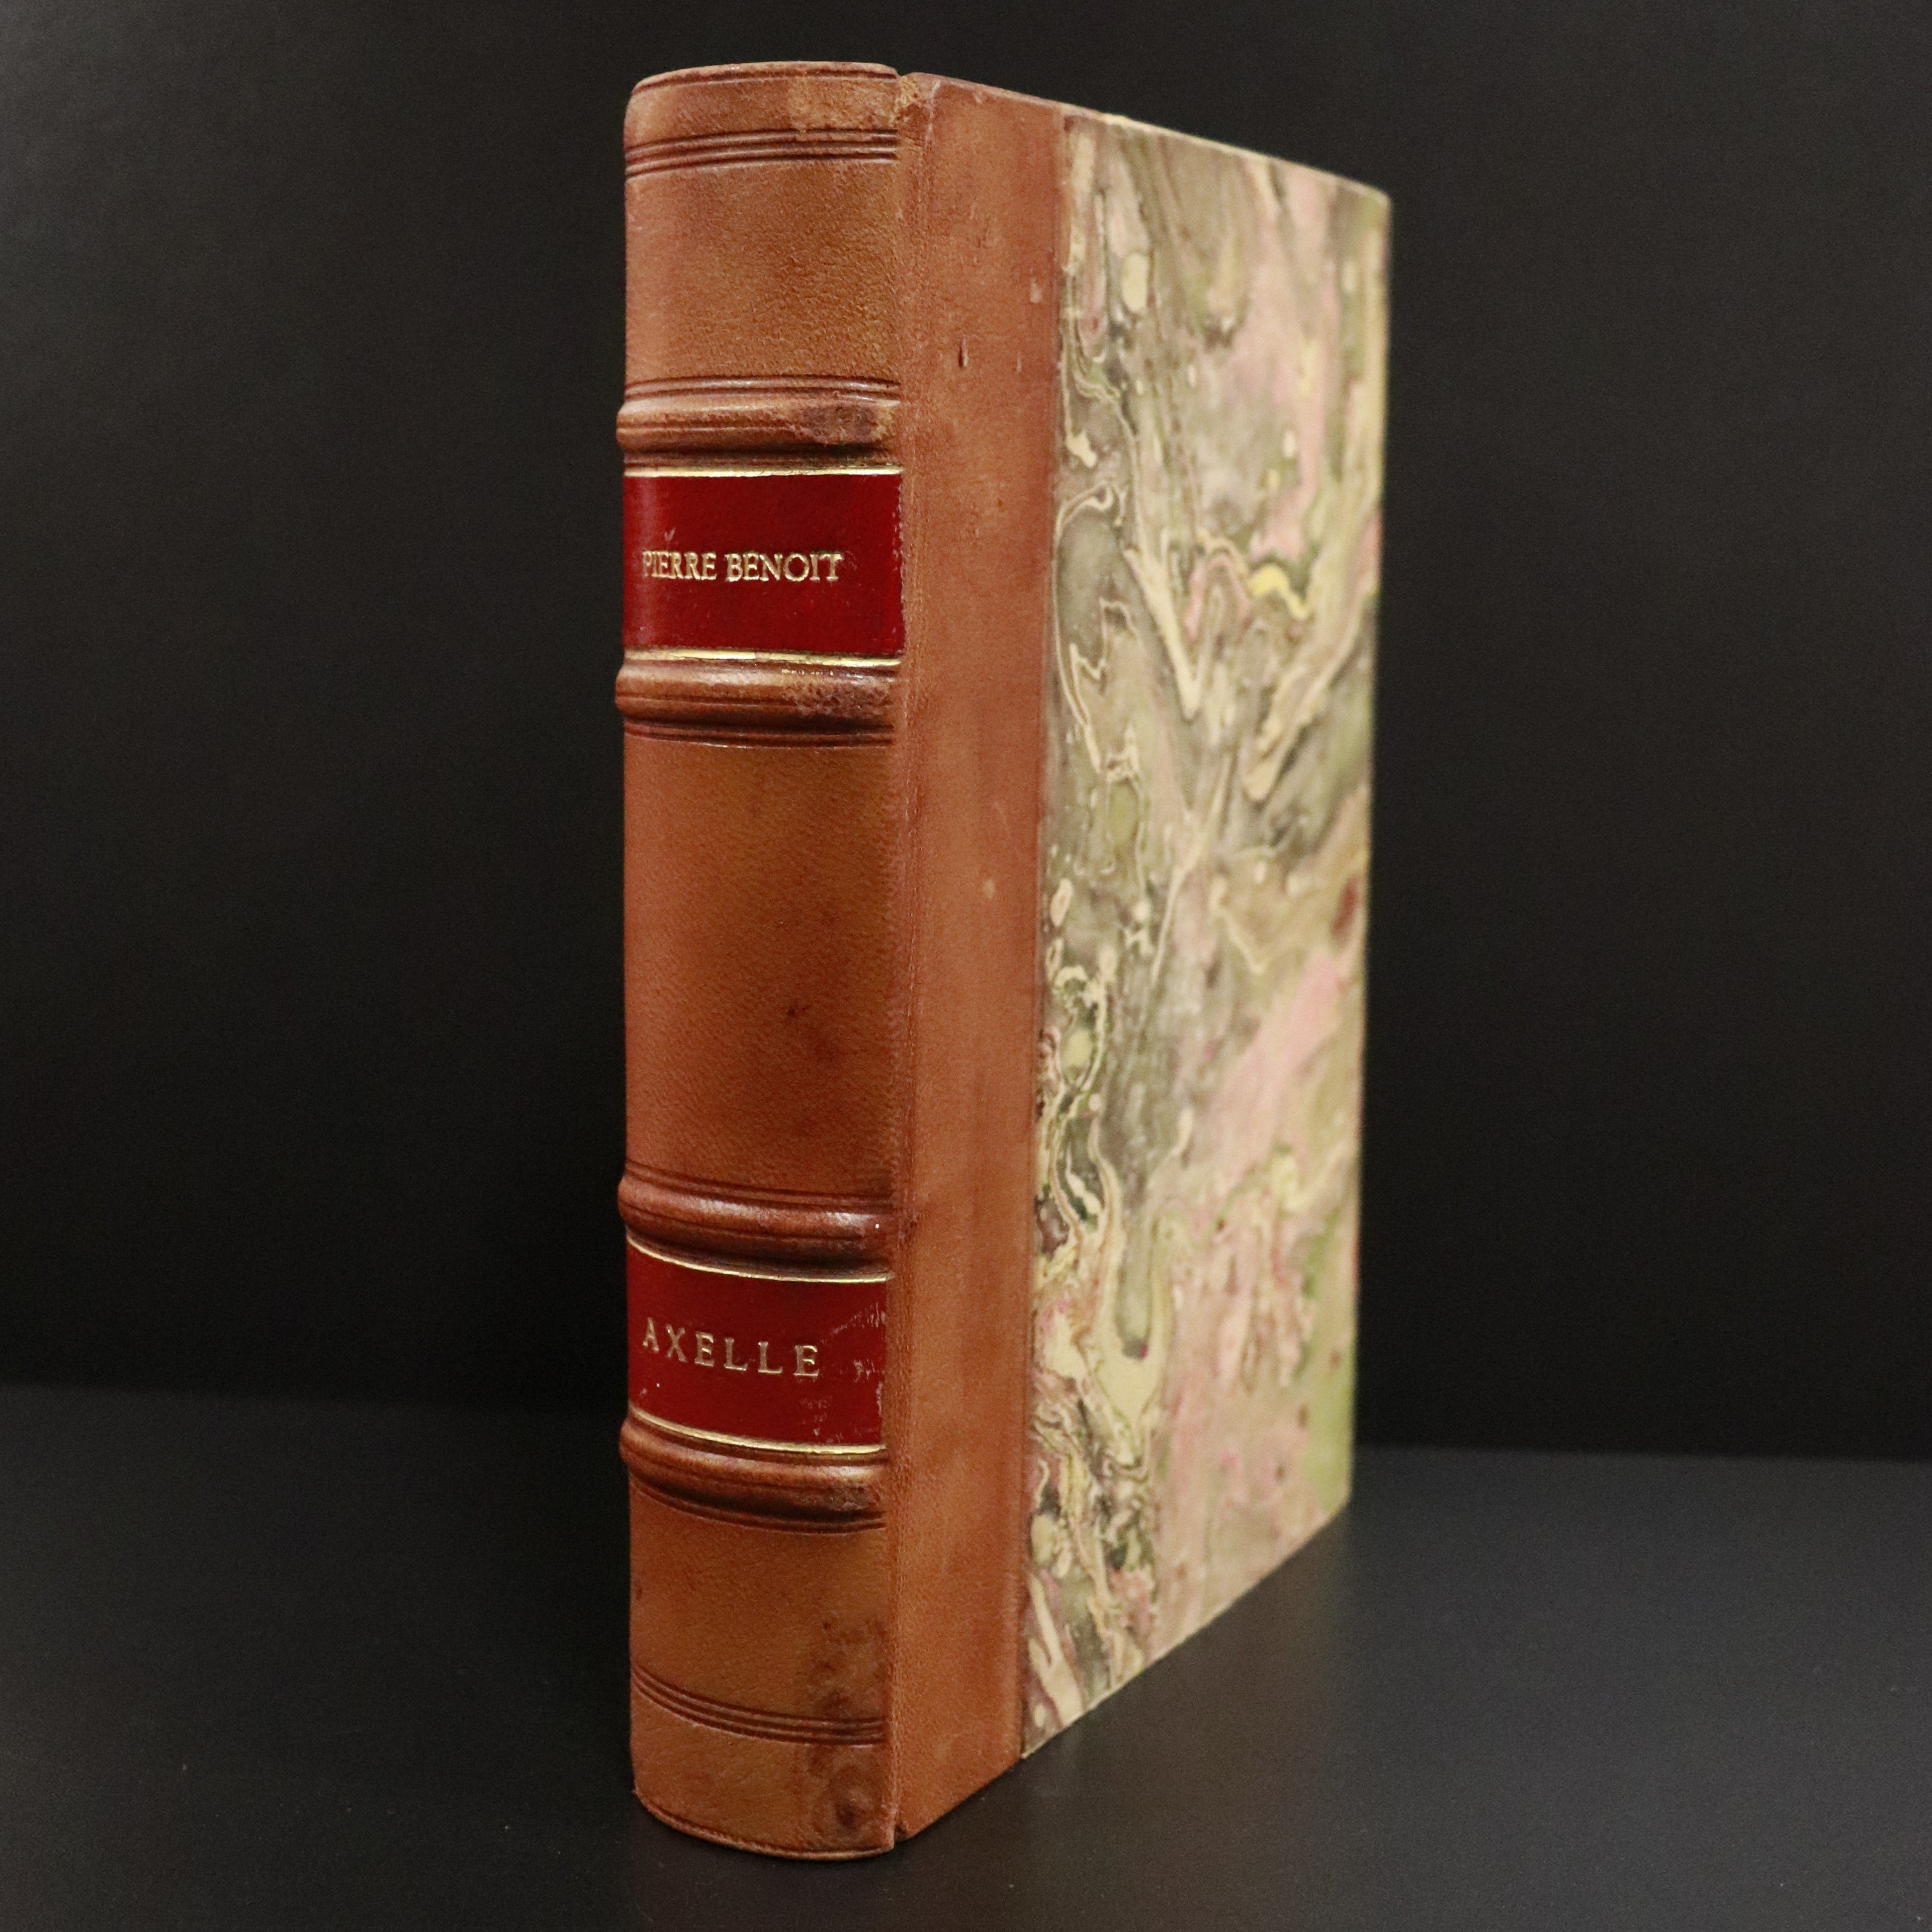 c1932 Axelle by Pierre Benoit Ltd Edition French Fiction Book Fine Binding